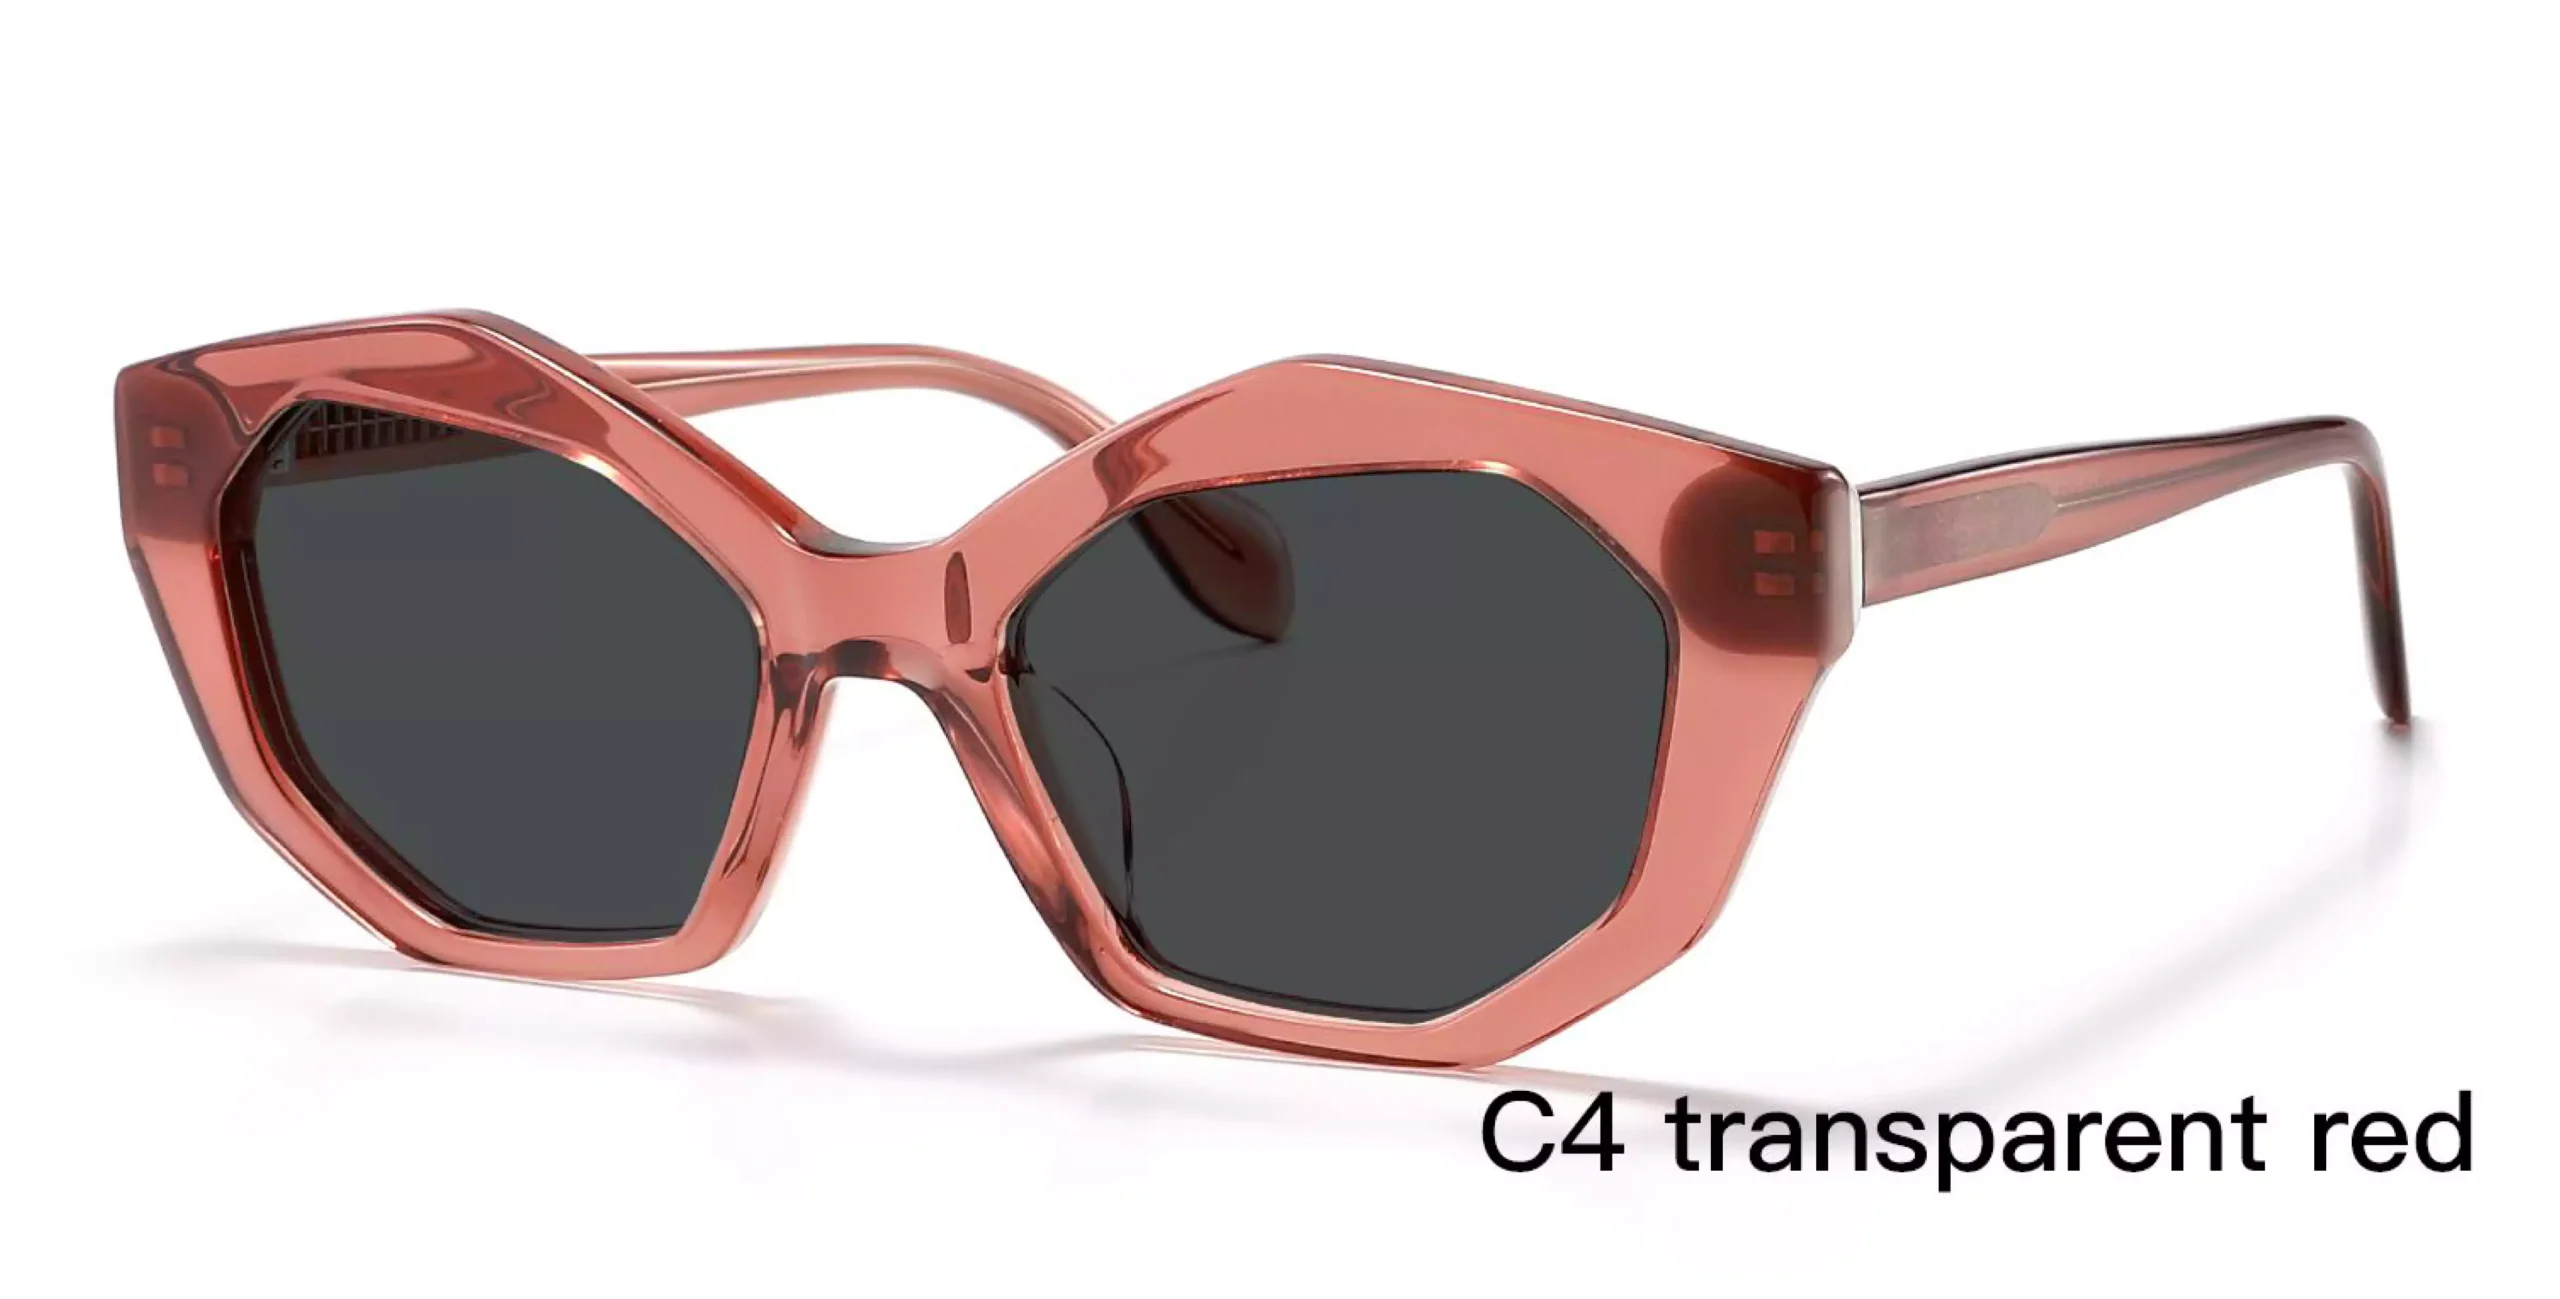 Affordable Sunglasses Wholesale, transparent red, UV protection, acetate, geometric, care vision